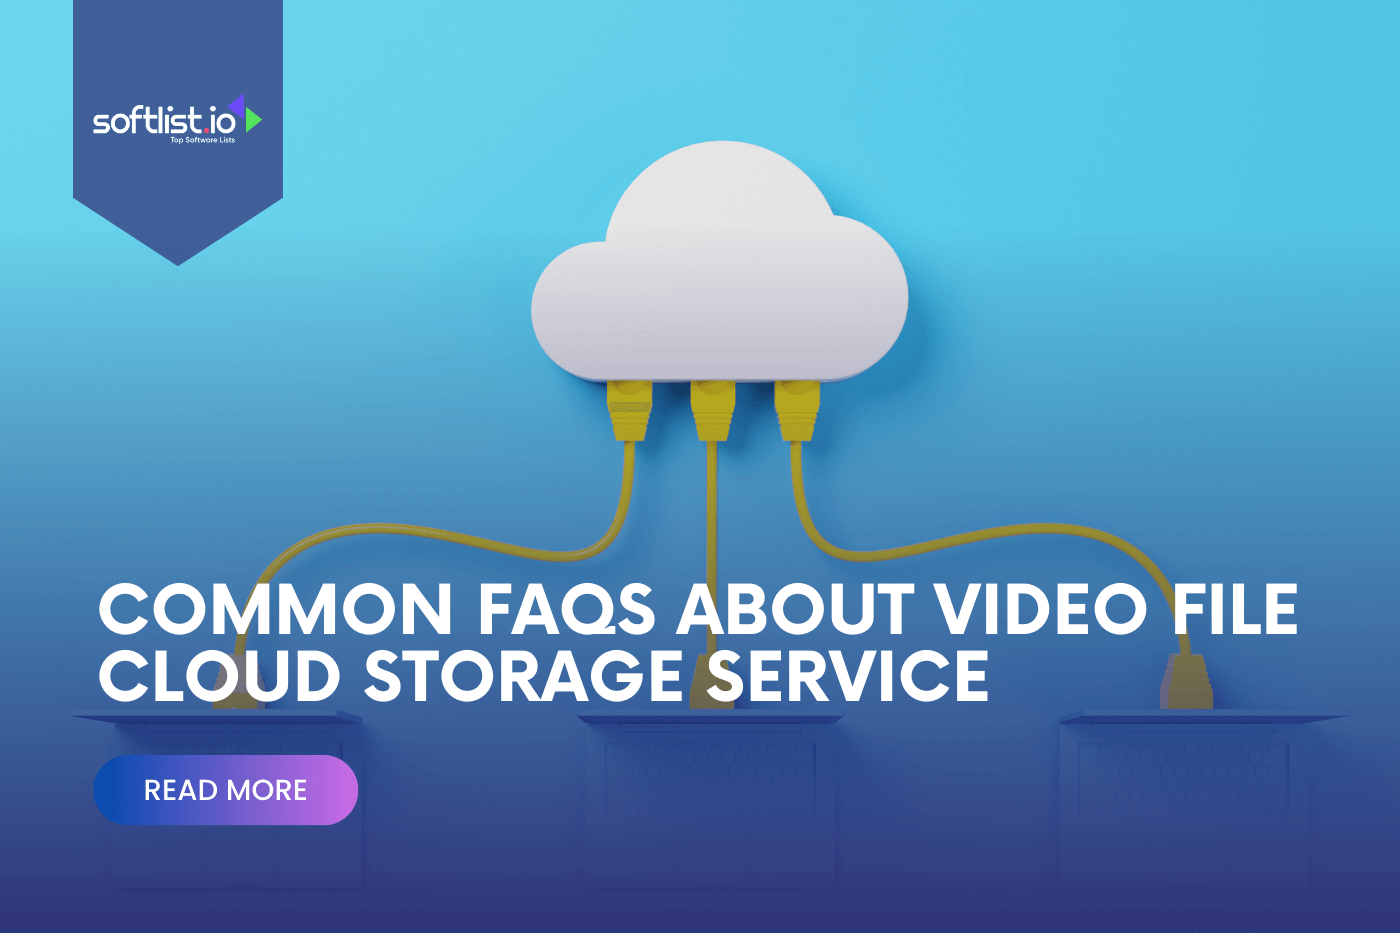 Common FAQs About Video File Cloud Storage Service